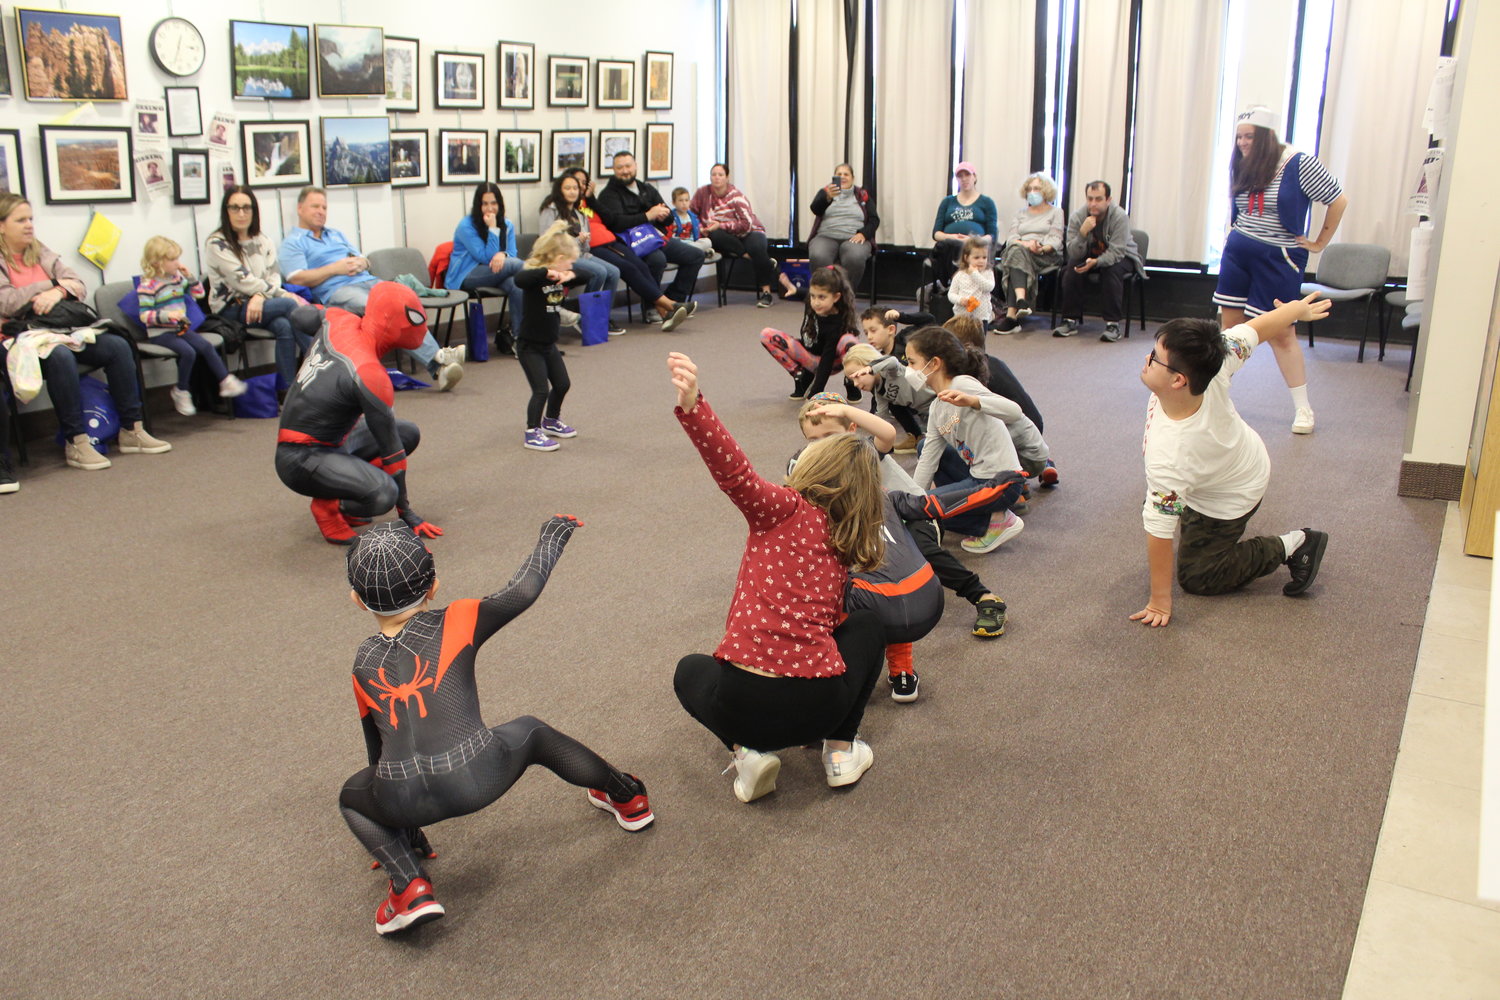 Spiderman teaches kids how to do different Spiderman positions.